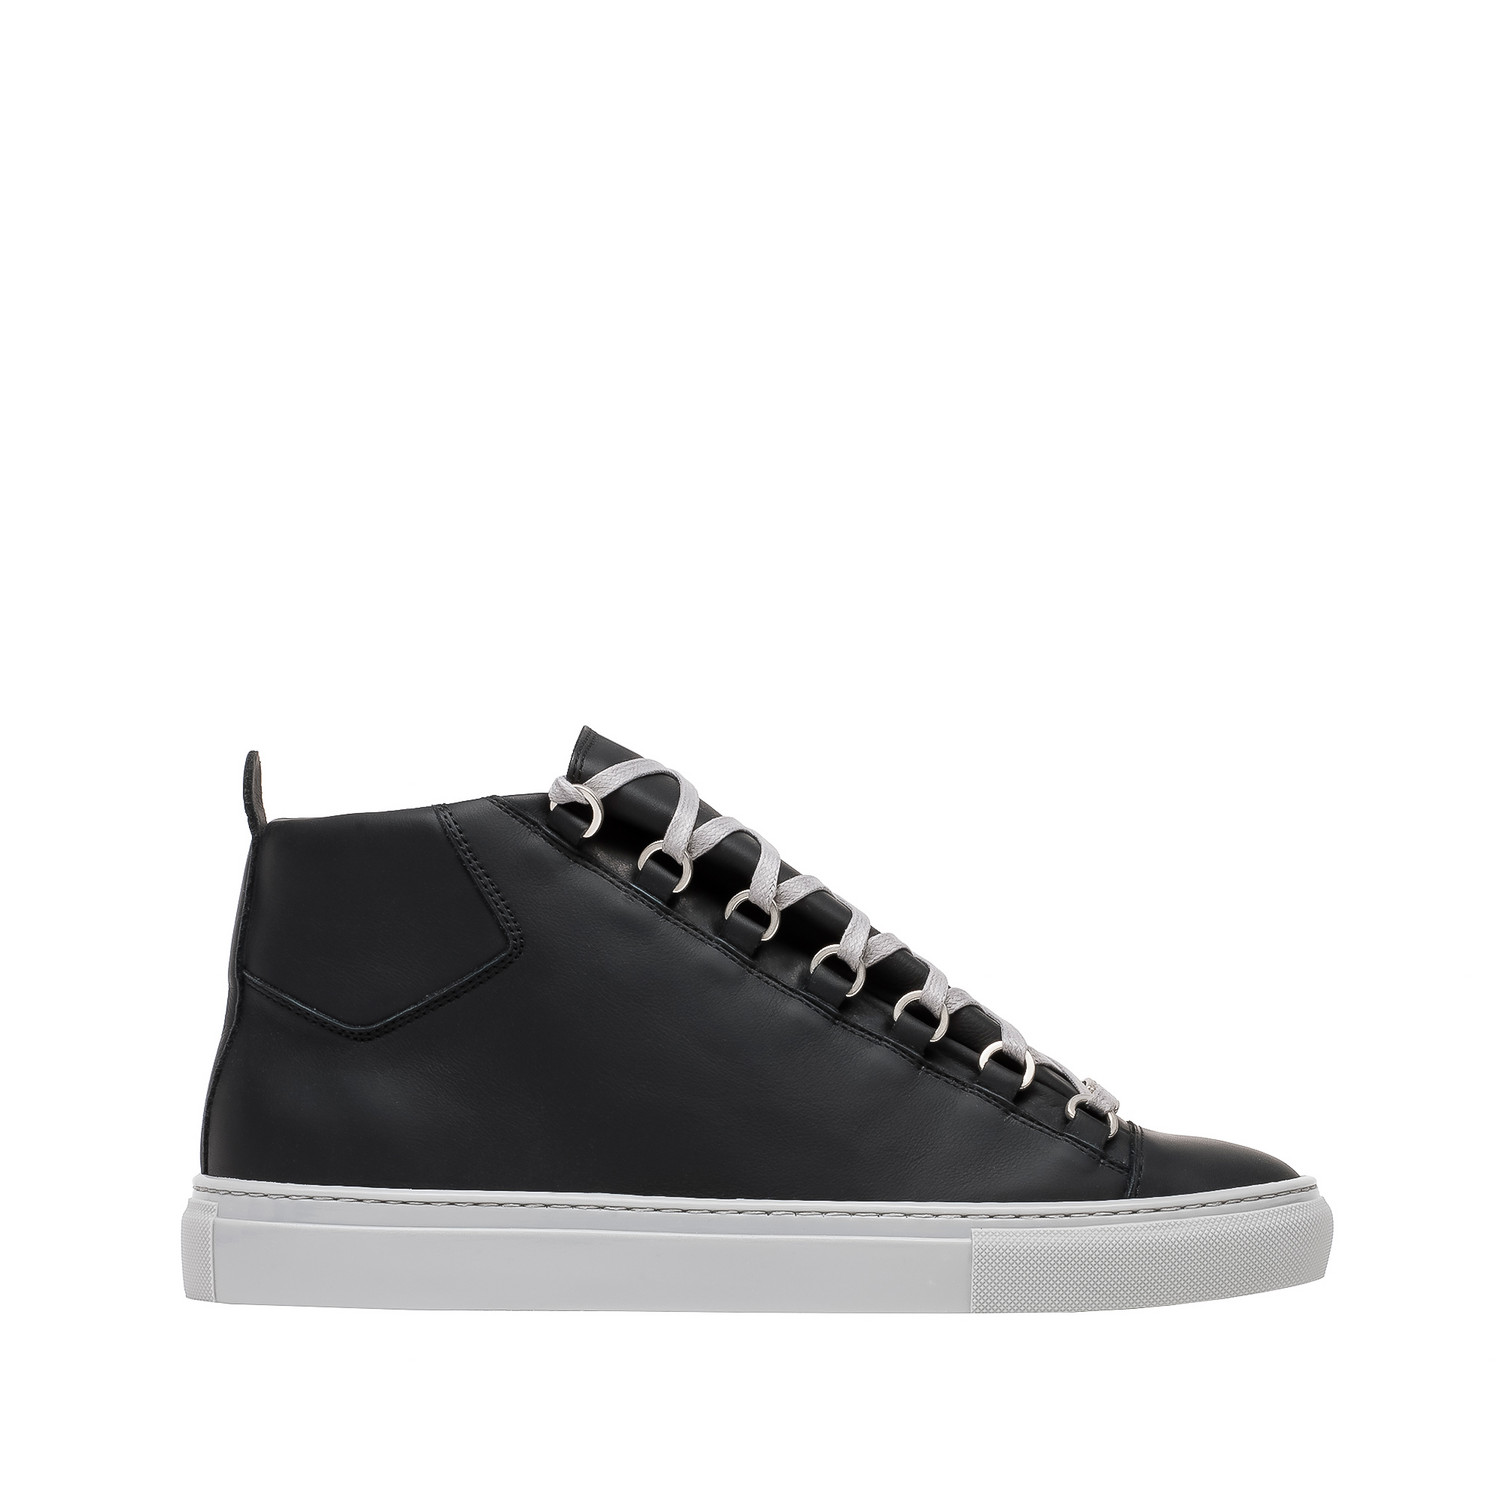 Balenciaga Holiday Collection Rubberised Calfskin High Sneakers Black ...